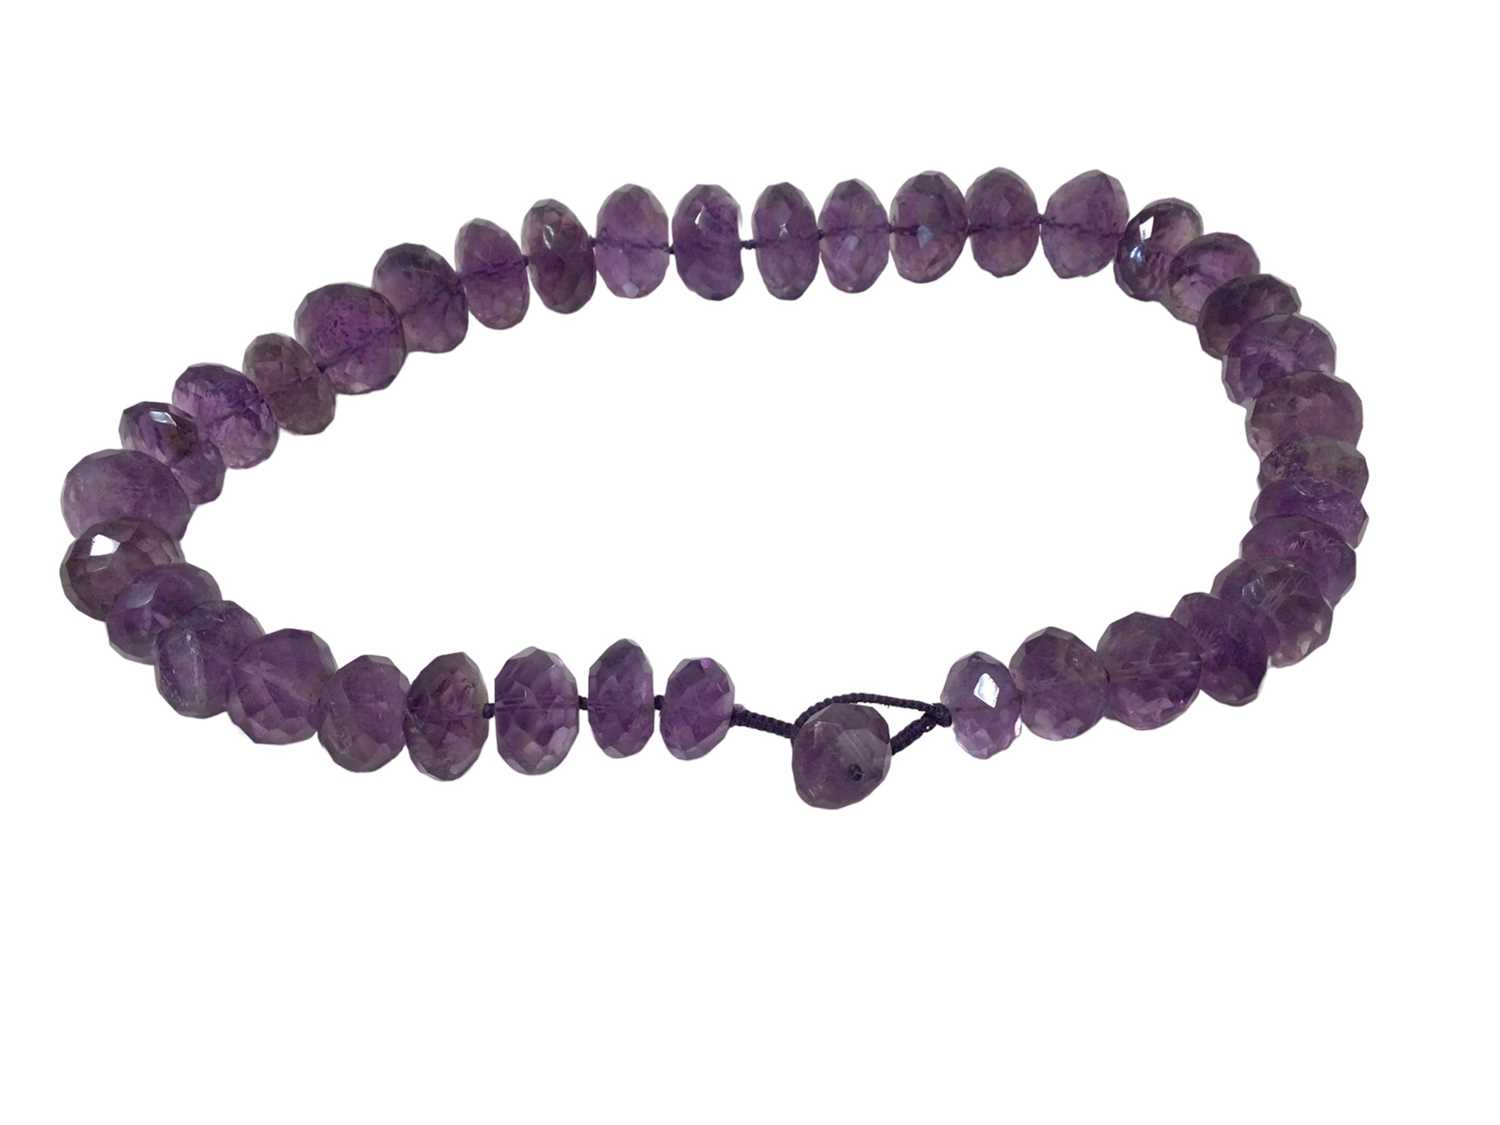 Amethyst bead necklace with a string of graduated faceted amethyst beads